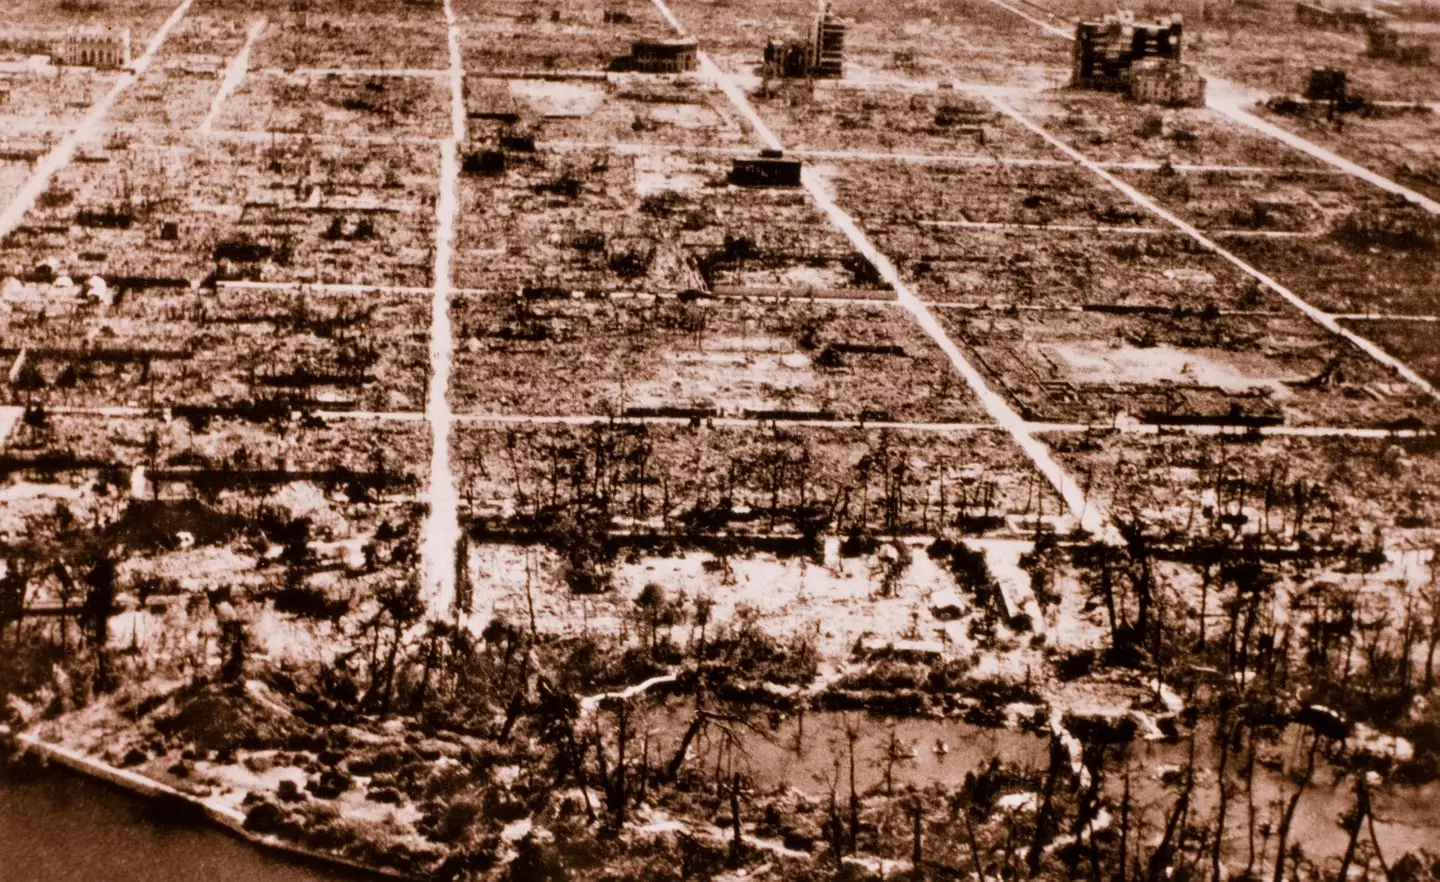 The aftermath of the bomb on Hiroshima.